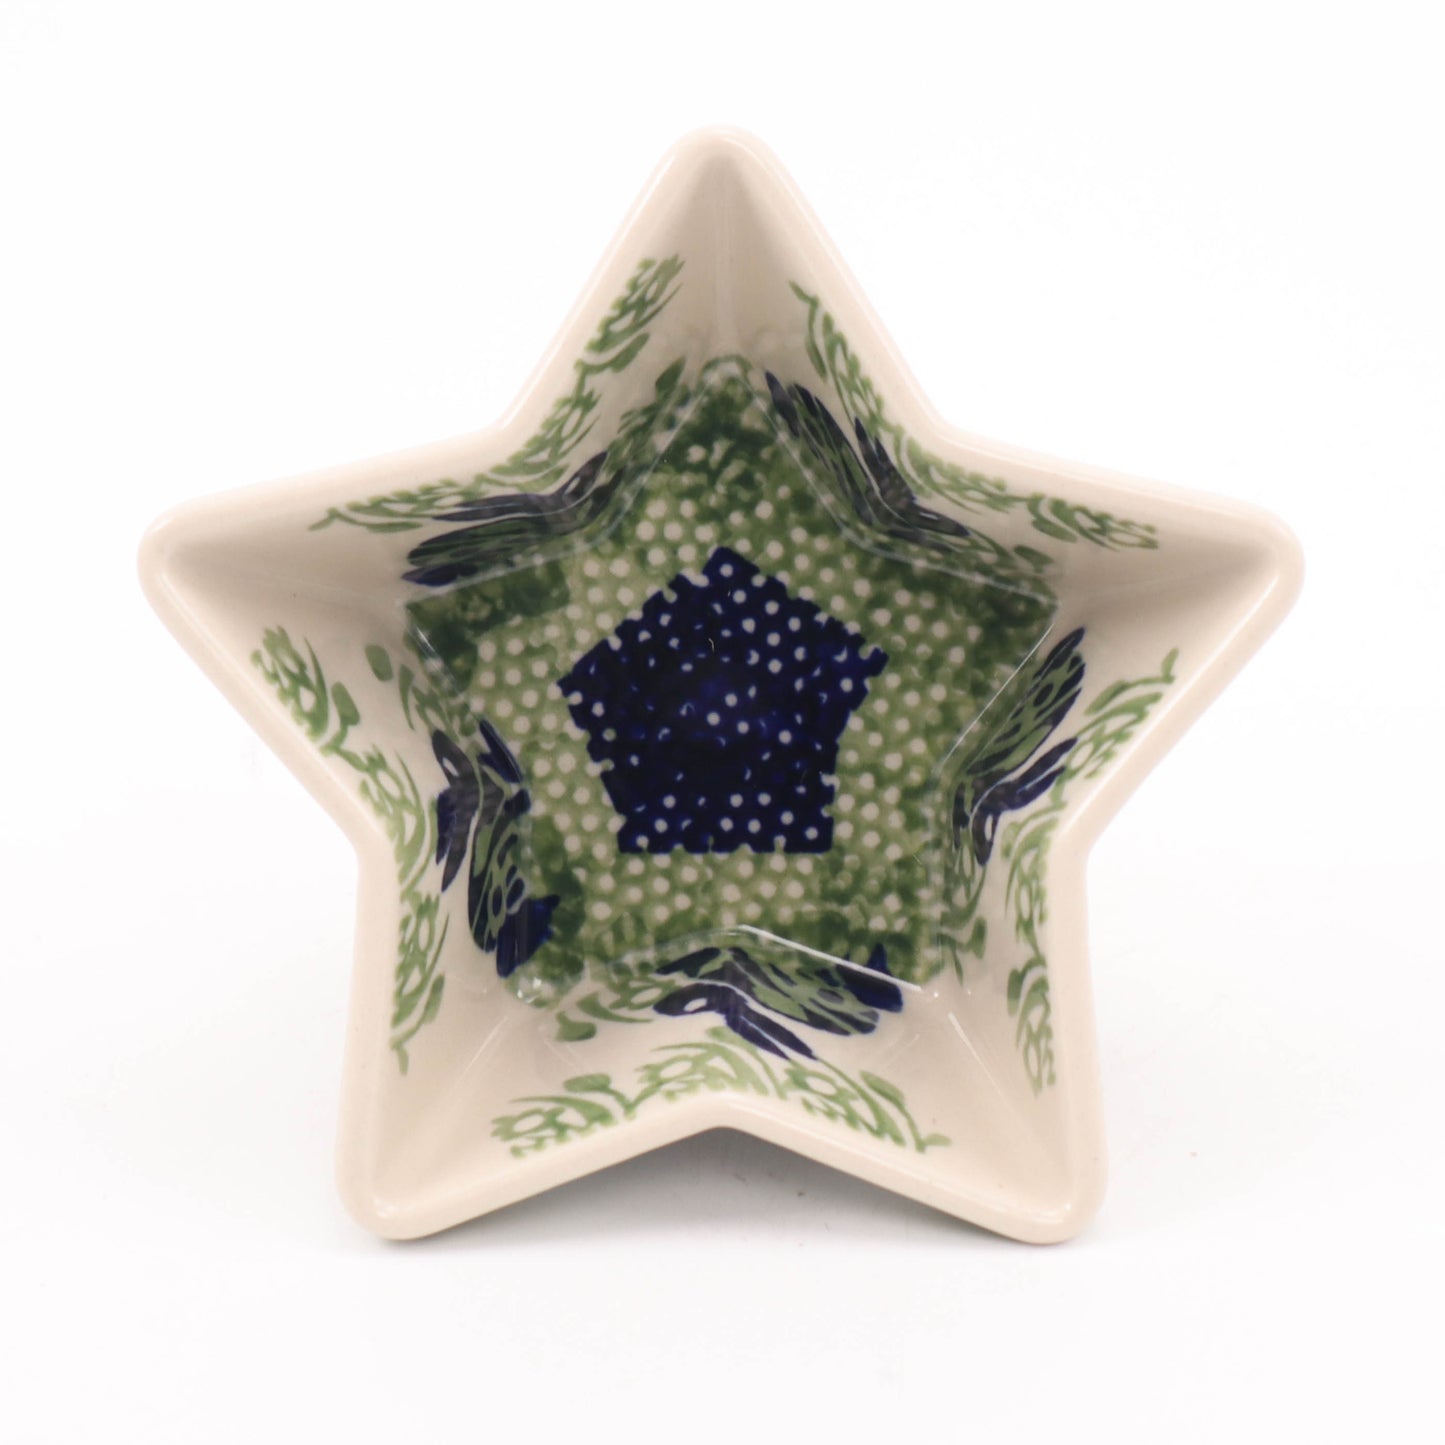 4.5" Small Star Bowl. Pattern: Bunny Business